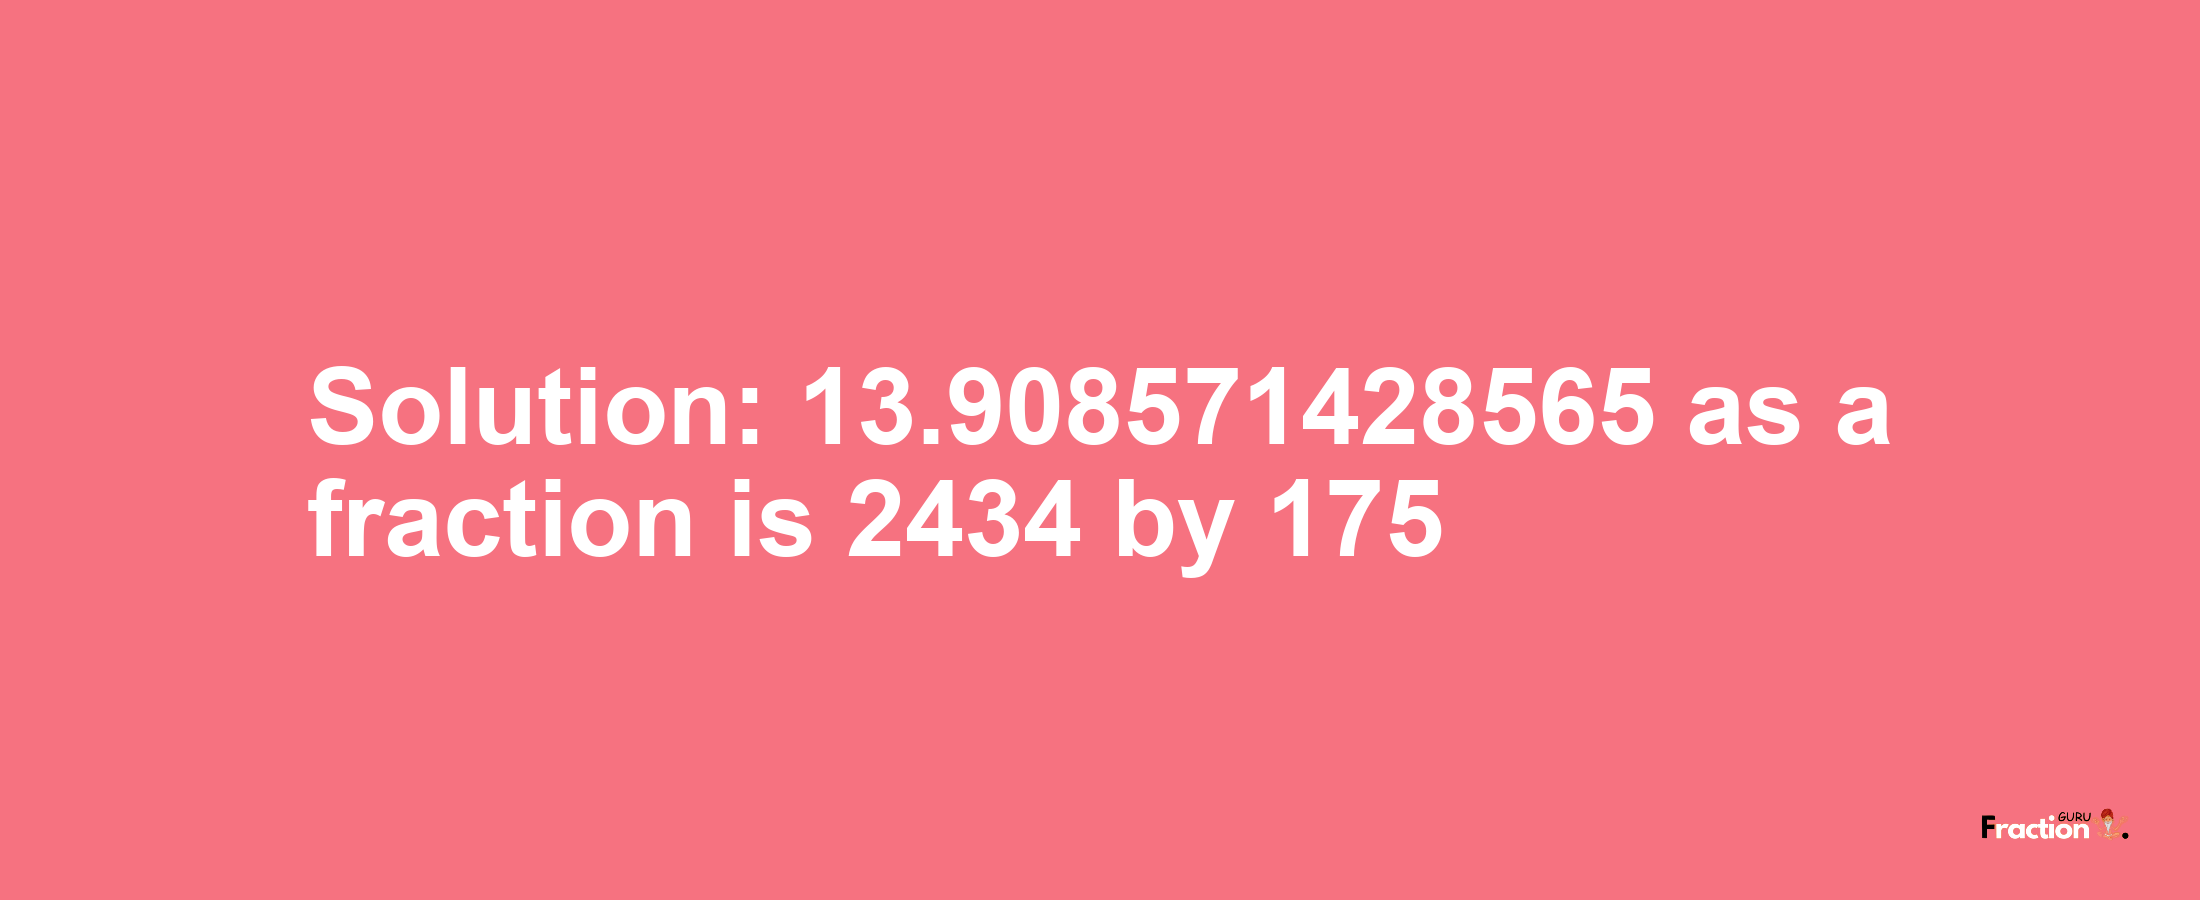 Solution:13.908571428565 as a fraction is 2434/175